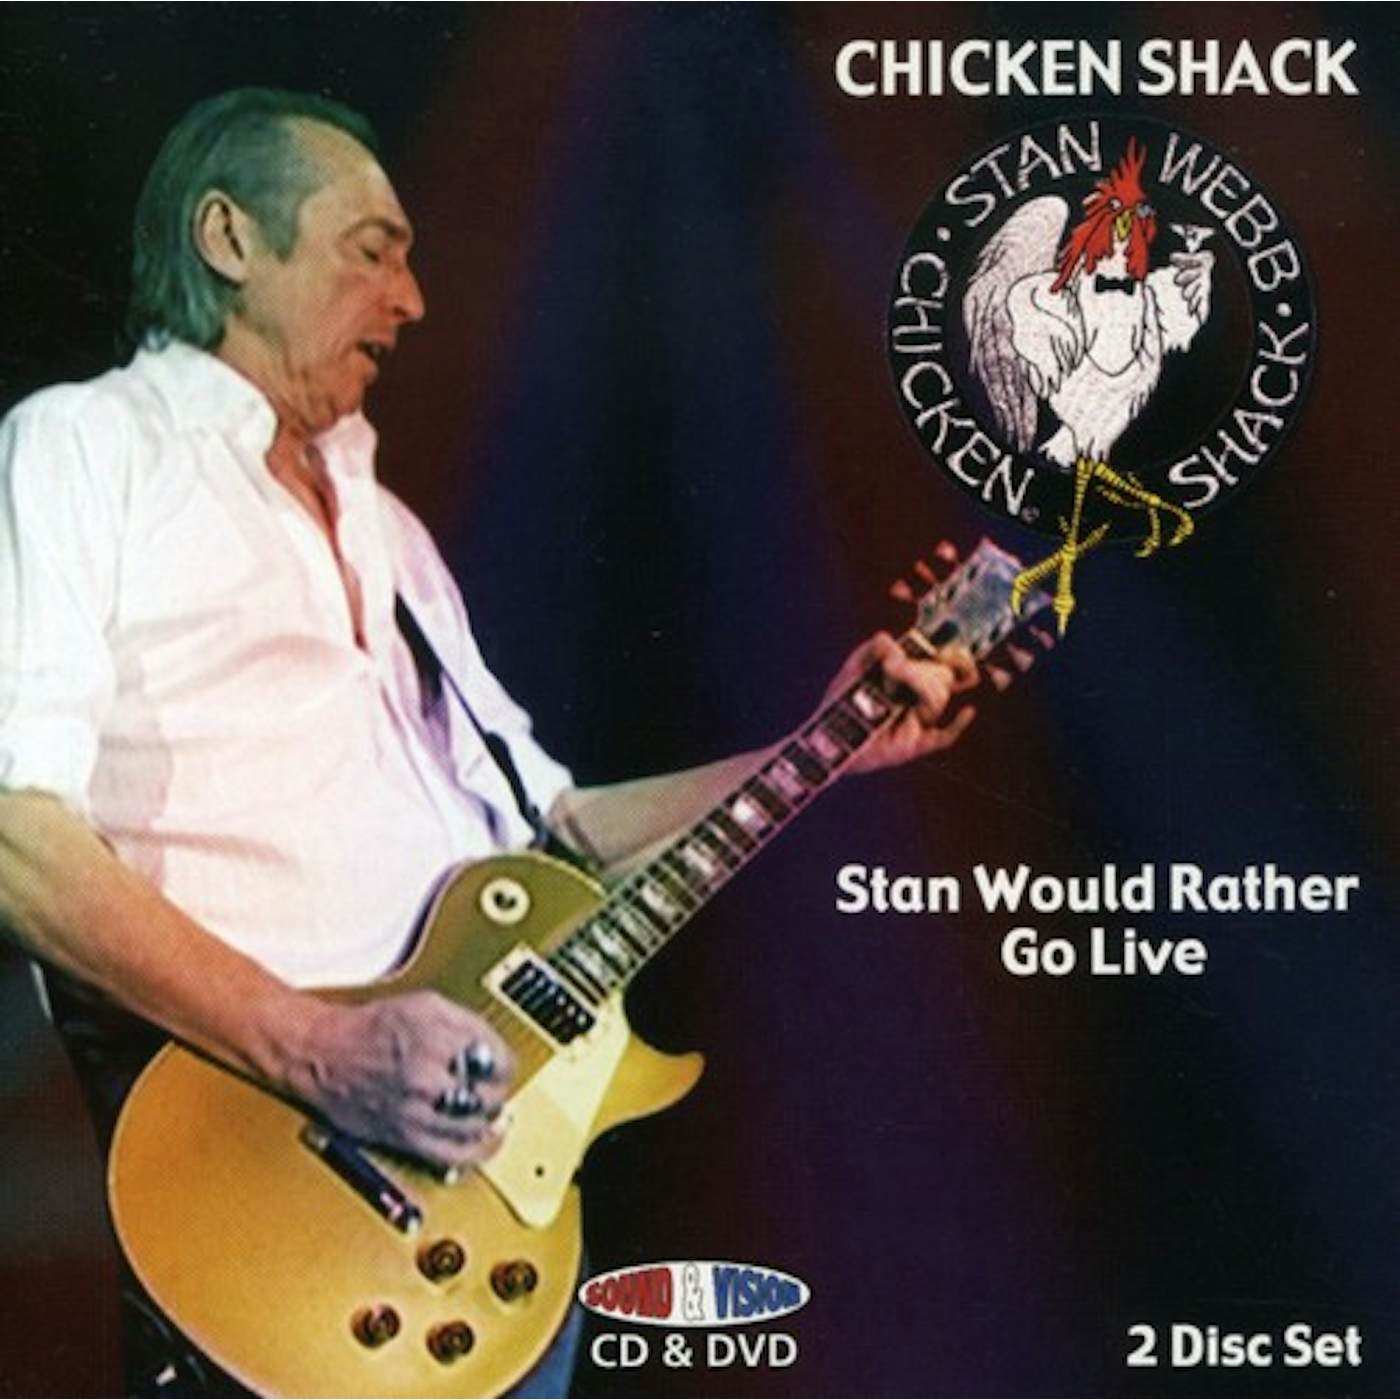 Chicken Shack STAN WOULD RATHER GO LIV CD